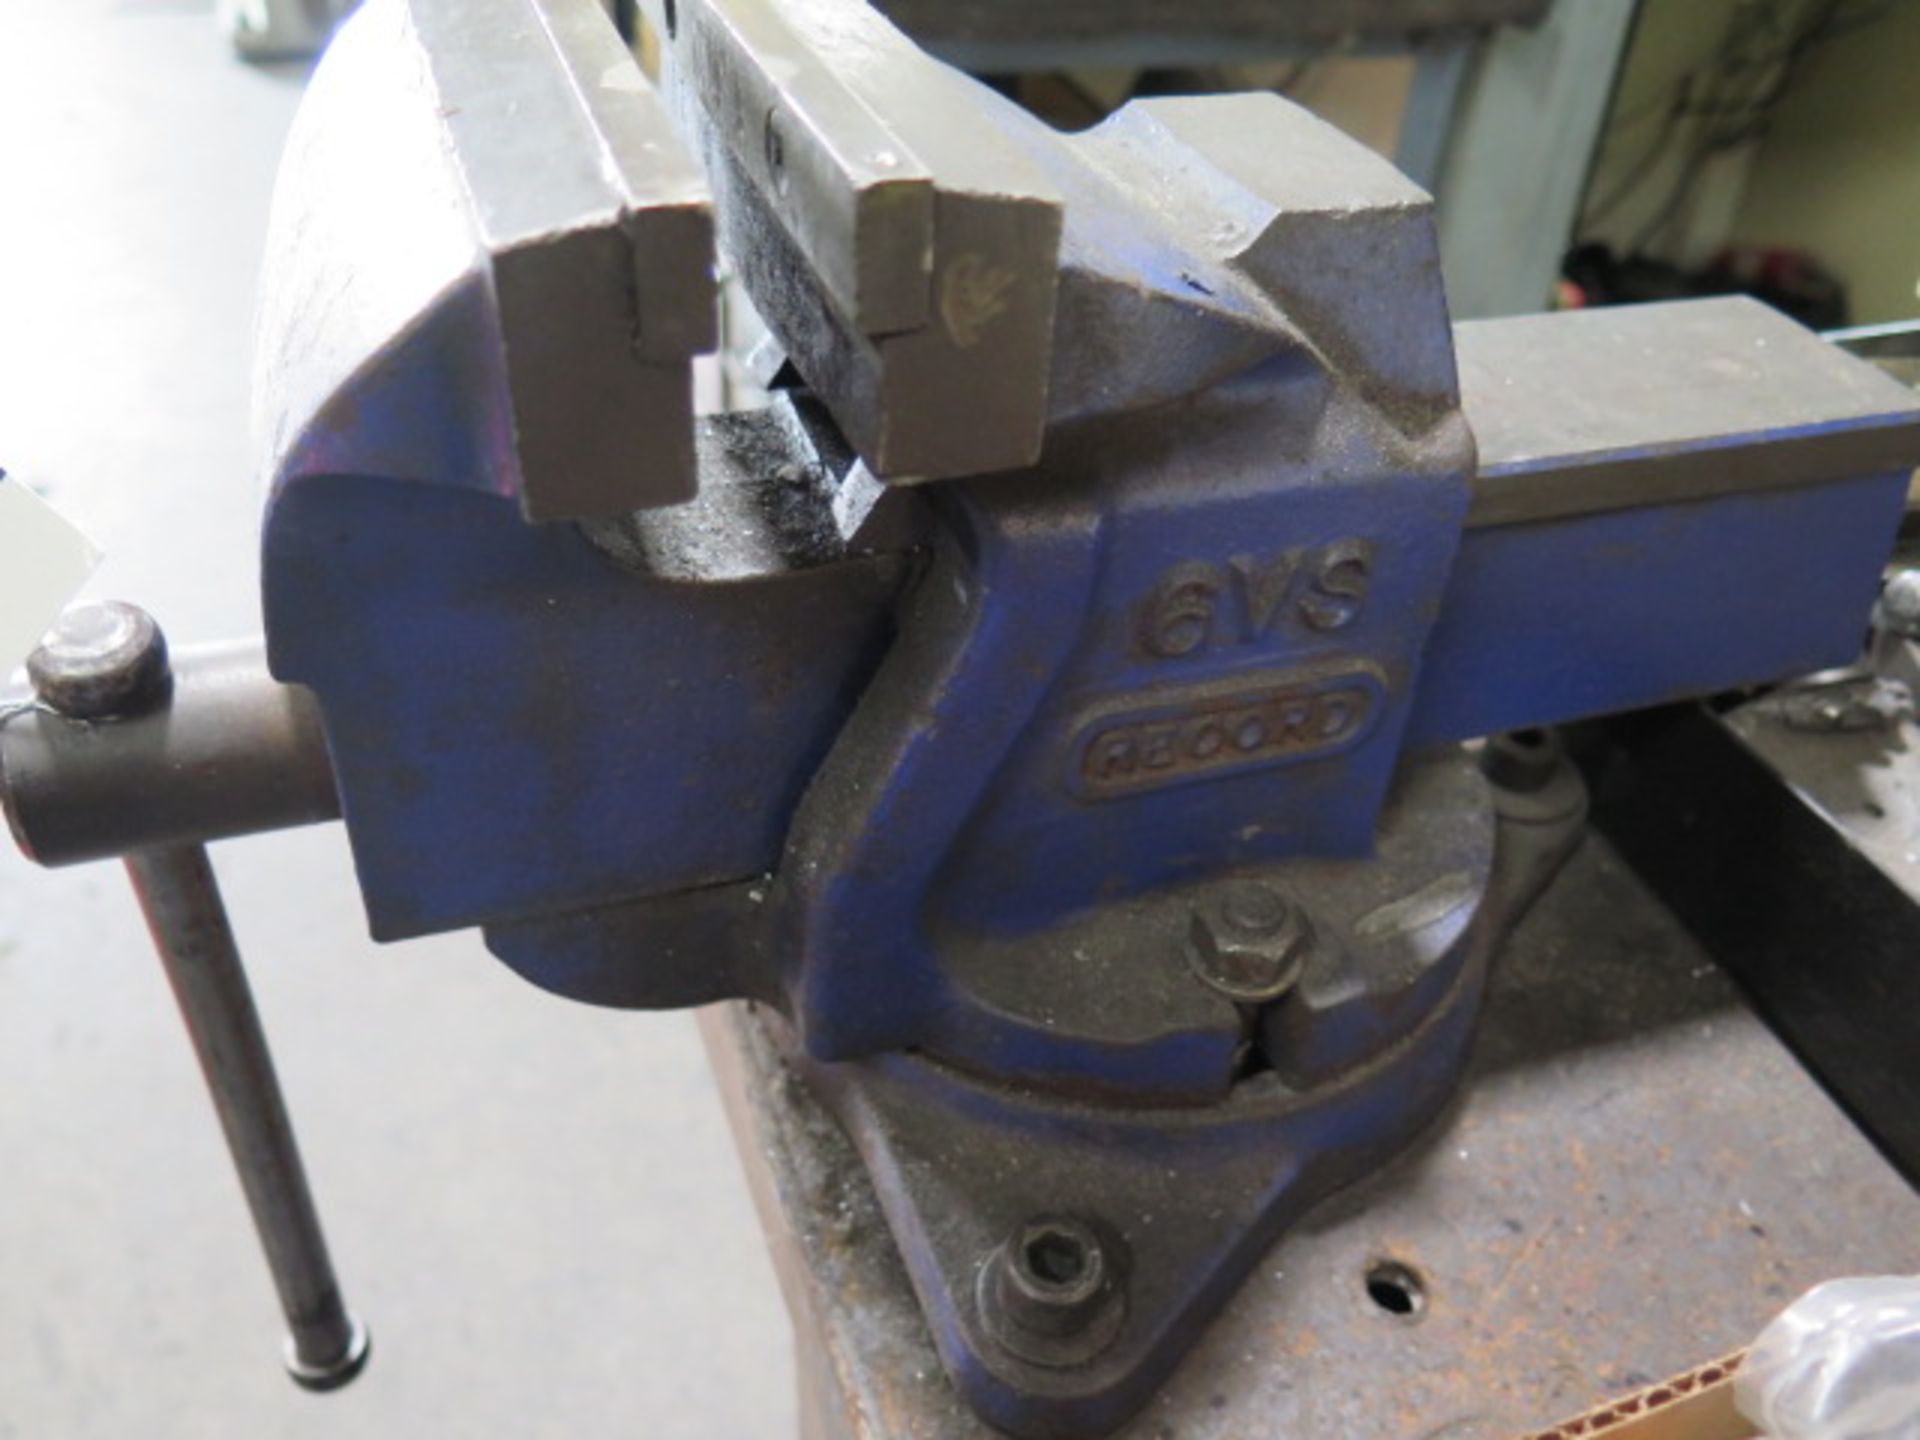 6" Bench Vise w/ Work bench (SOLD AS-IS - NO WARRANTY) - Image 3 of 6